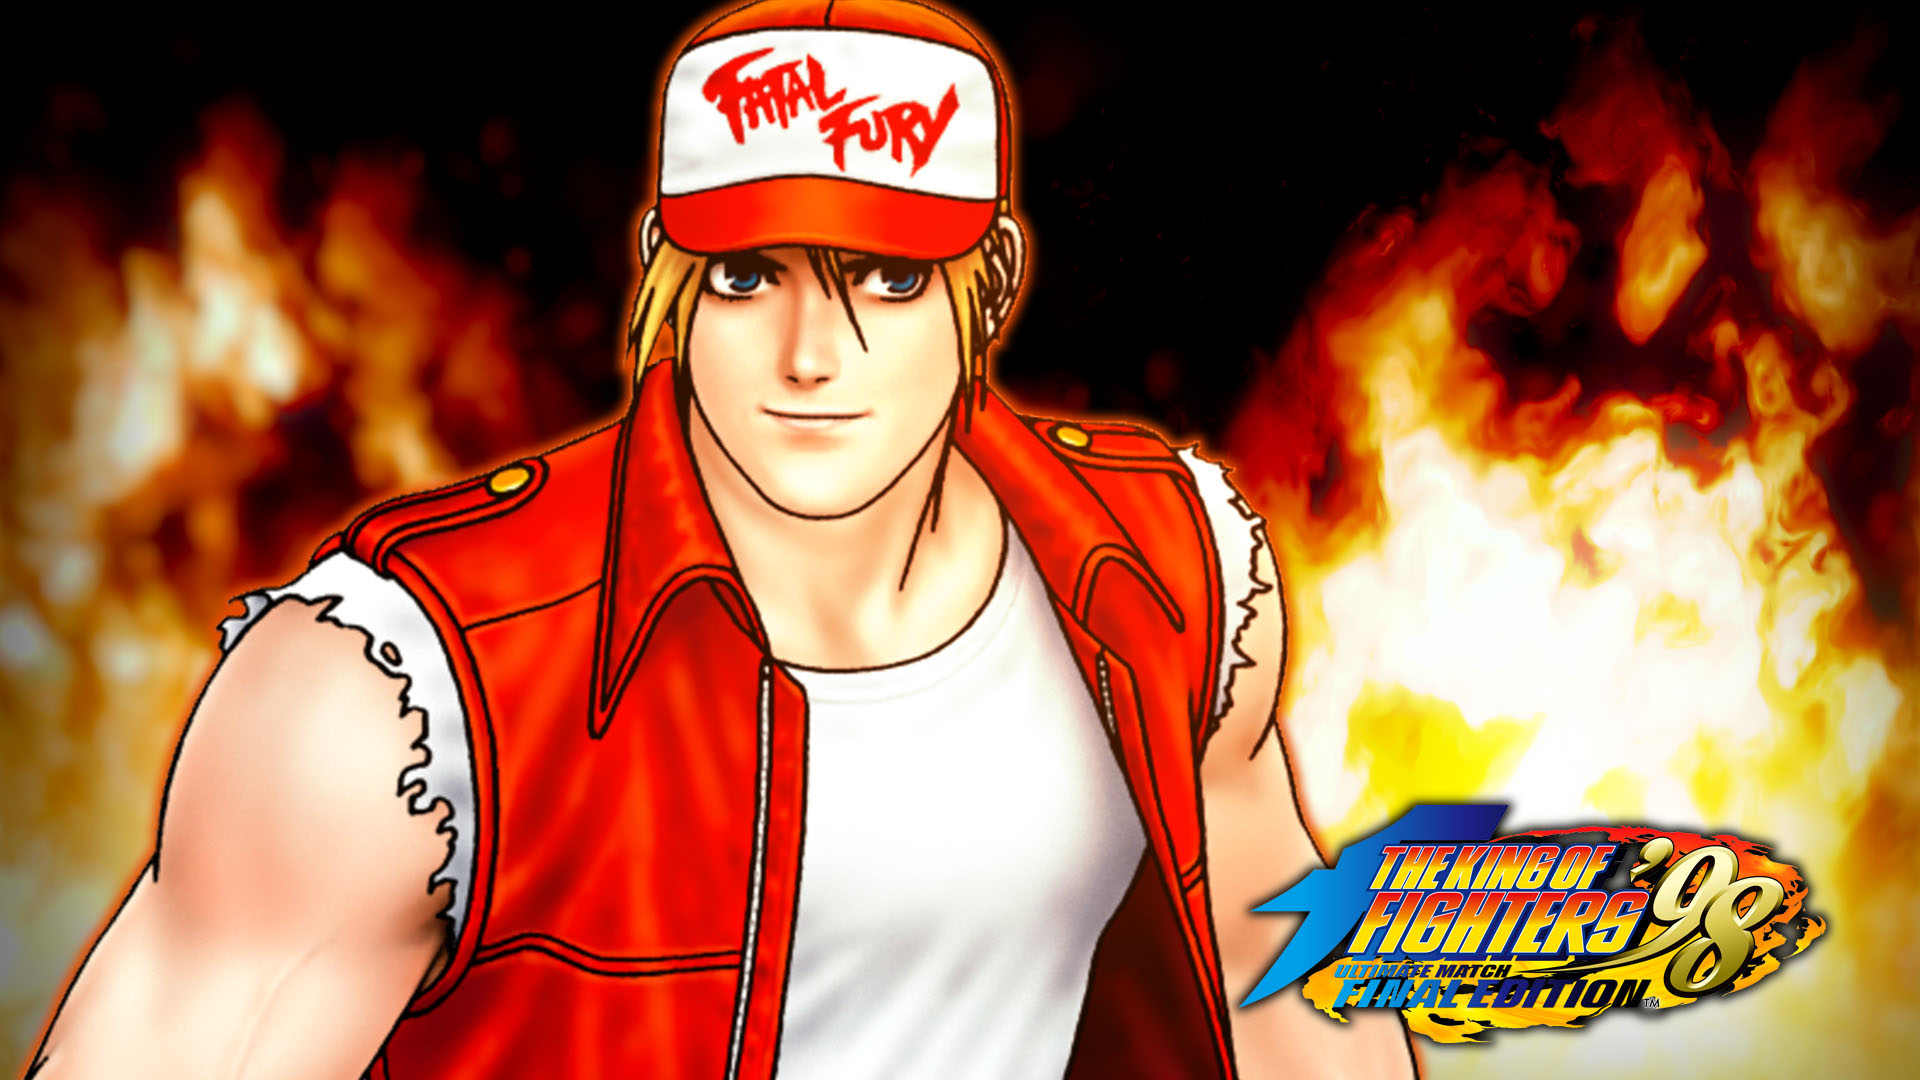 the king of fighters 98 artwork